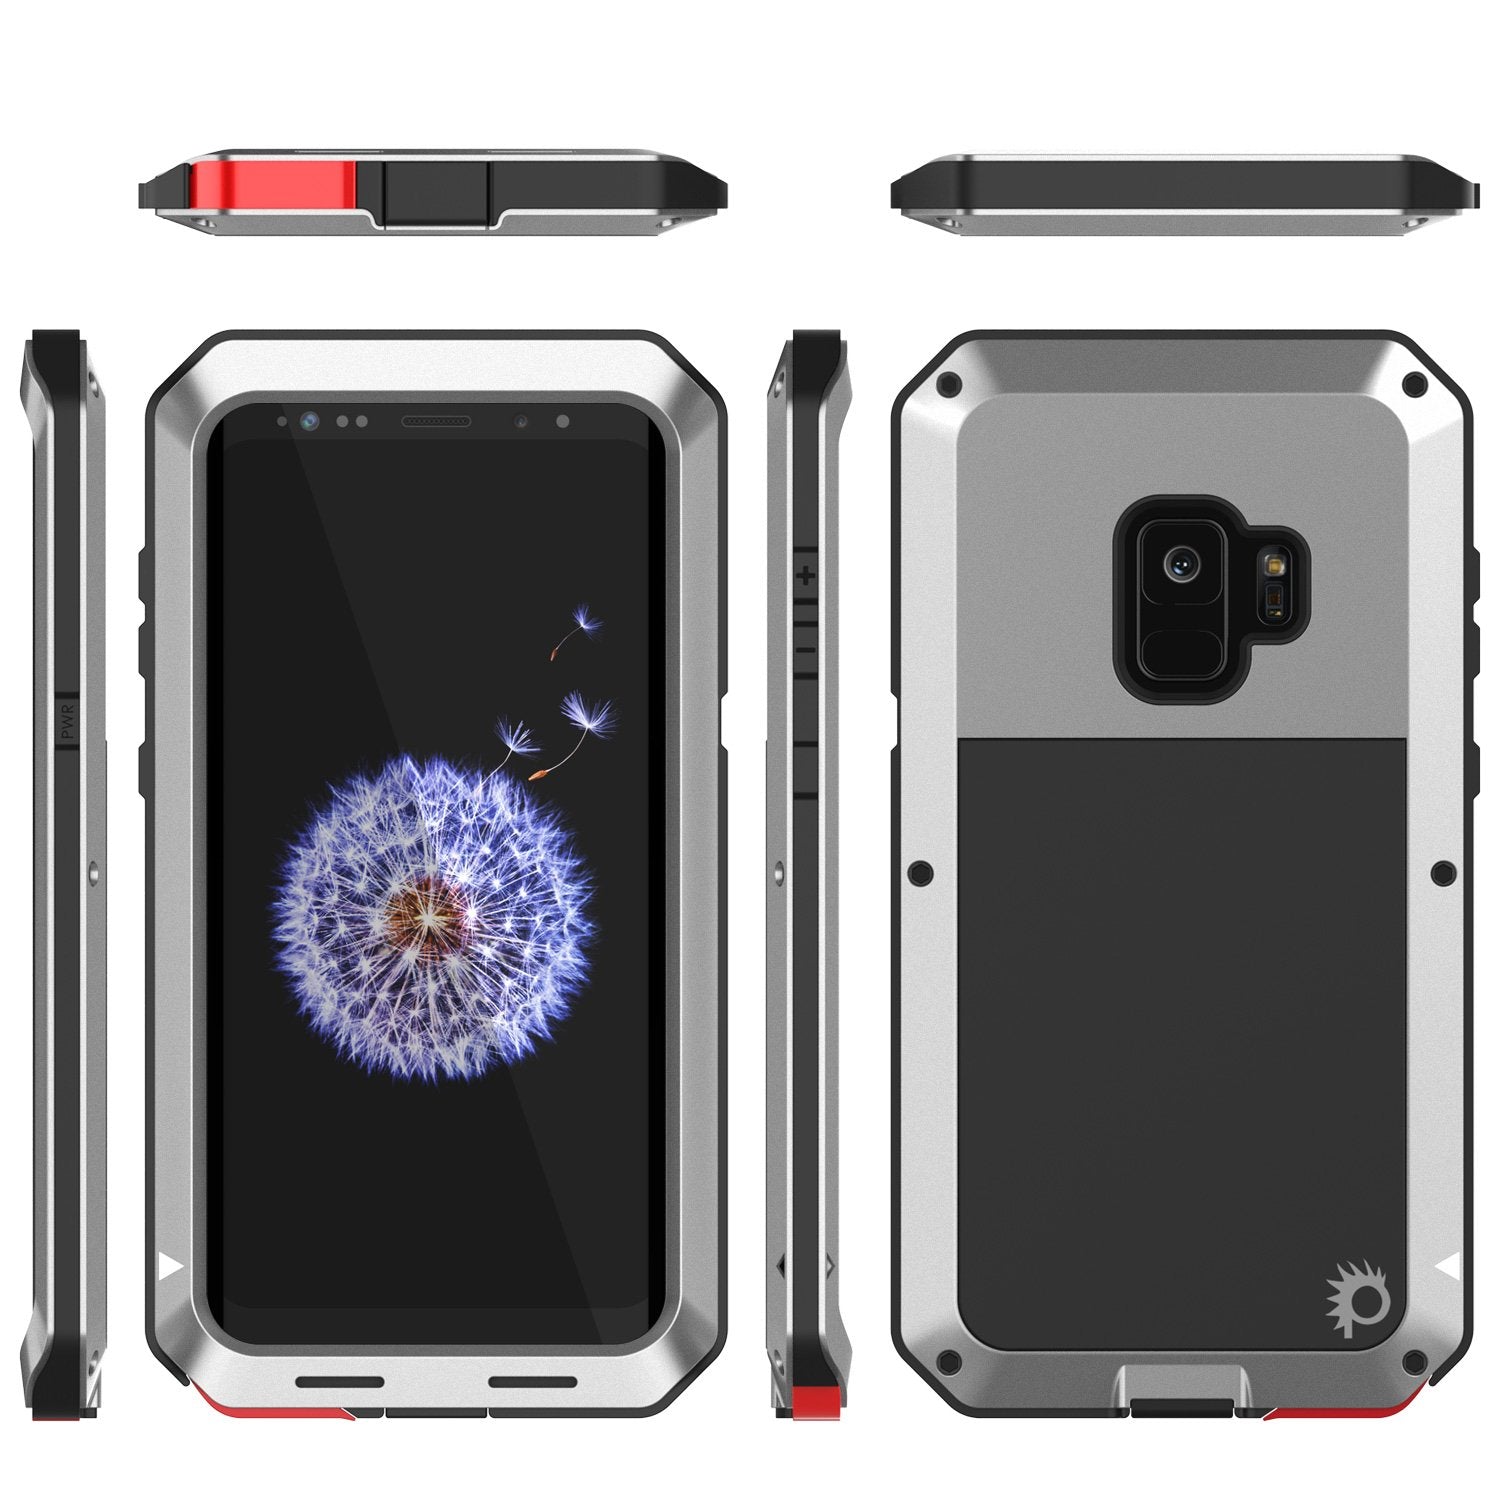 Galaxy S9 Metal Case, Heavy Duty Military Grade Rugged Armor Cover [shock proof] Hybrid Full Body Hard Aluminum & TPU Design [non slip] W/ Prime Drop Protection for Samsung Galaxy S9 [Silver]